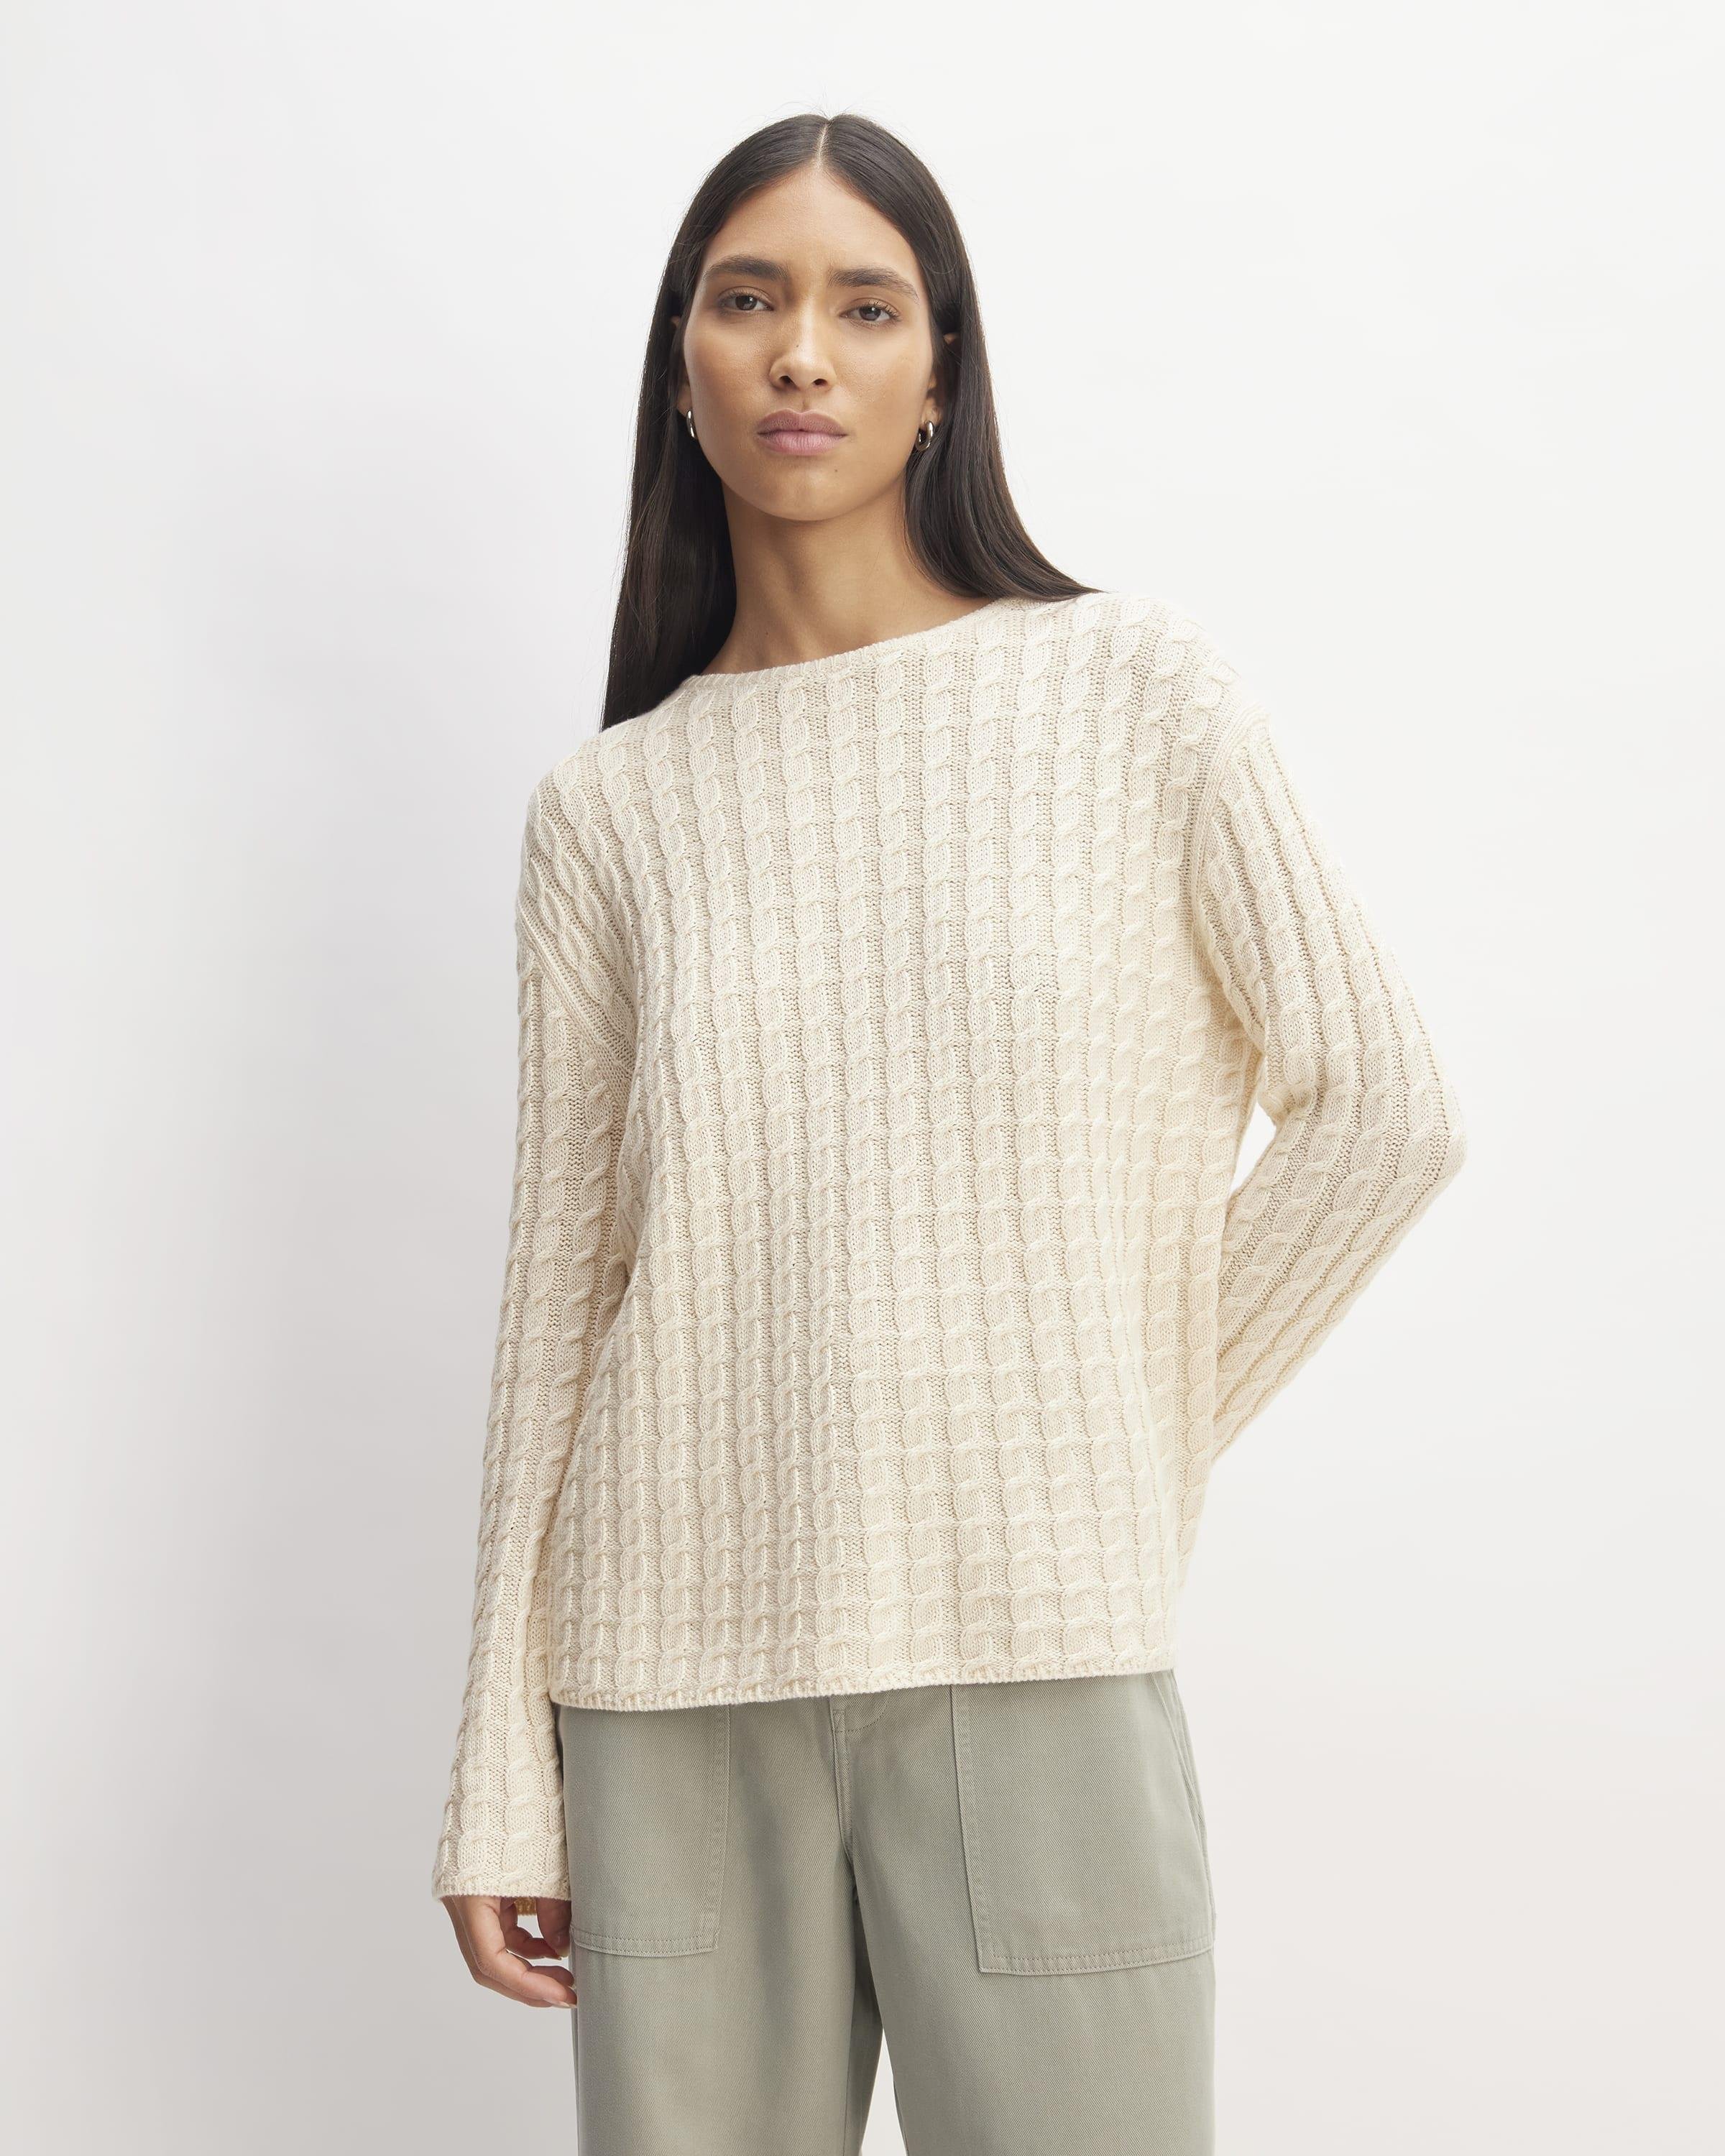 The Cotton Merino Cable Crew by EVERLANE